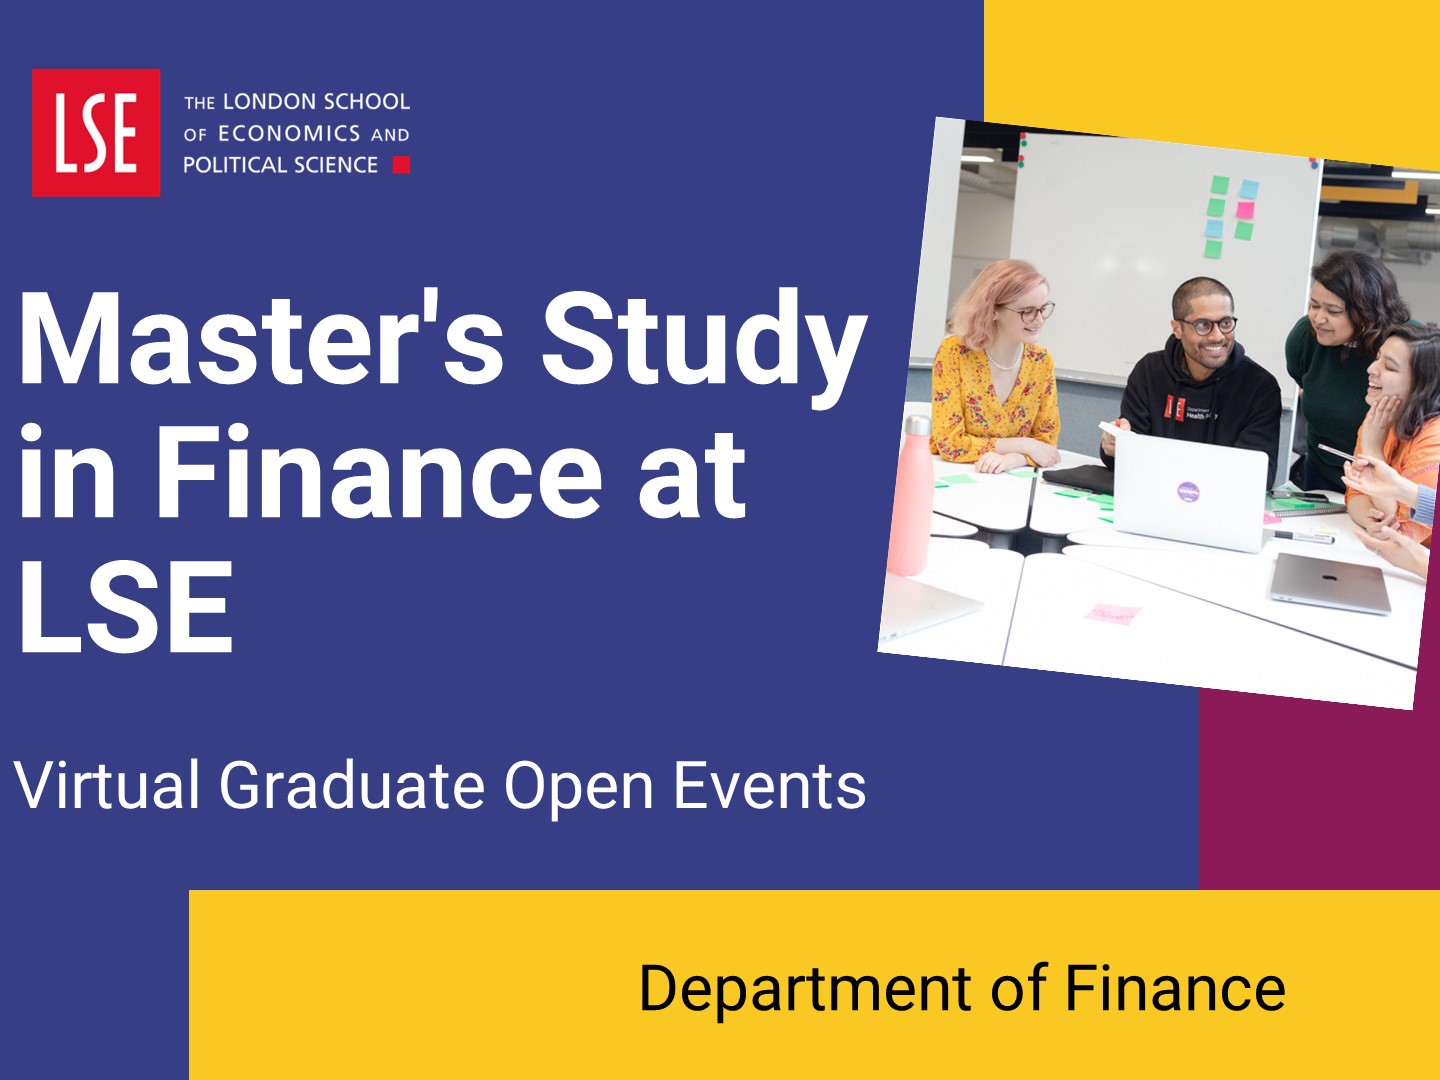 Introduction to master's study in Finance at LSE